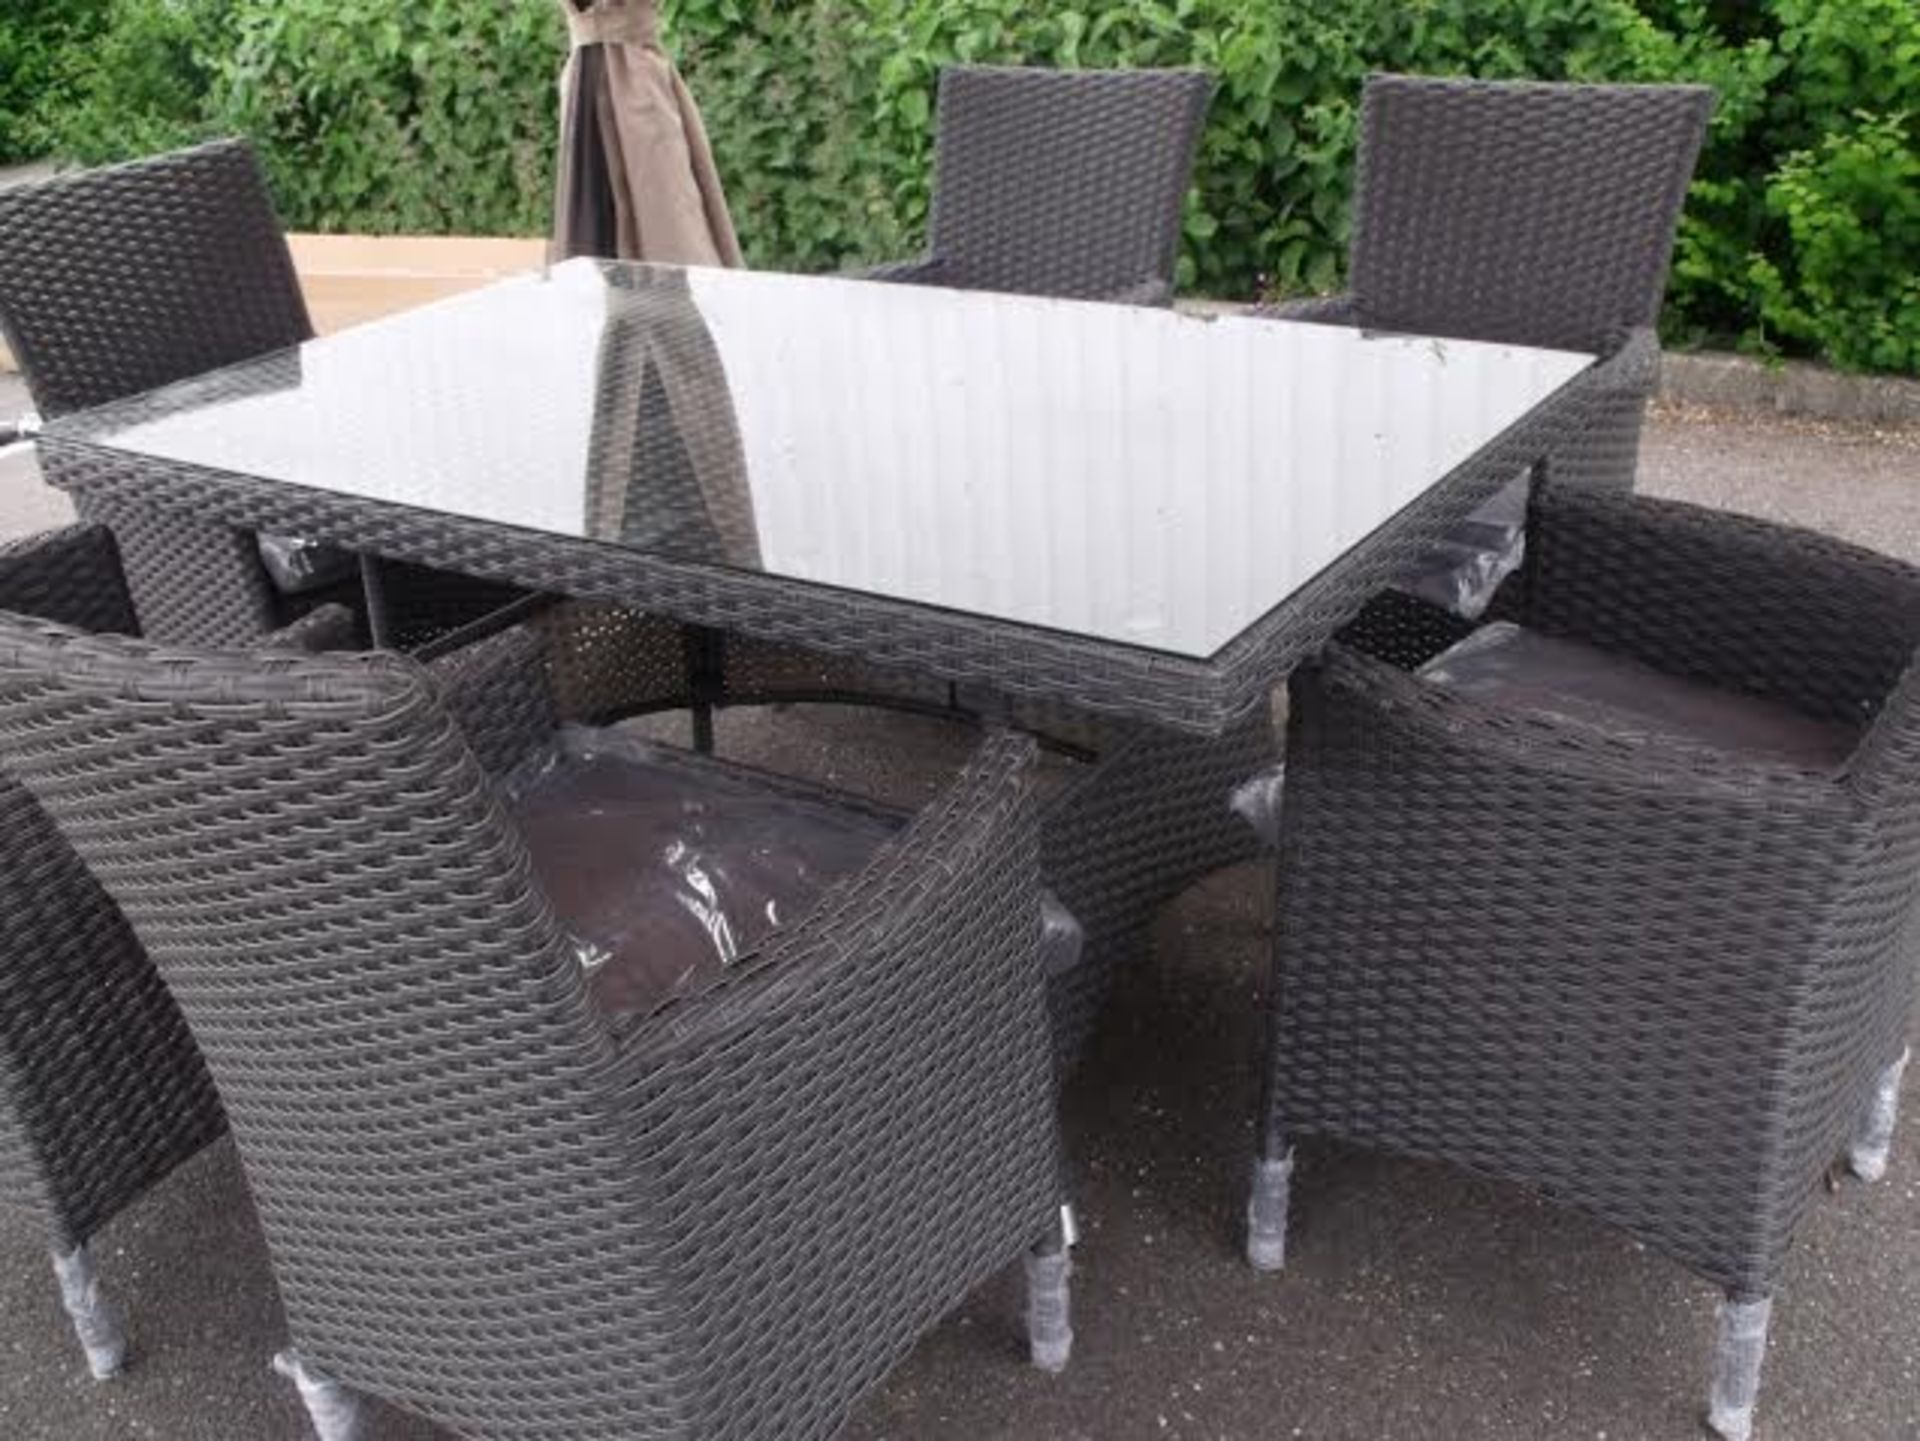 7 PIECE QUALITY RATTAN PATIO / DINING SET MULTI GREY ALL WEATHER PU RATTAN WITH CONTRASTING GREY - Image 2 of 2